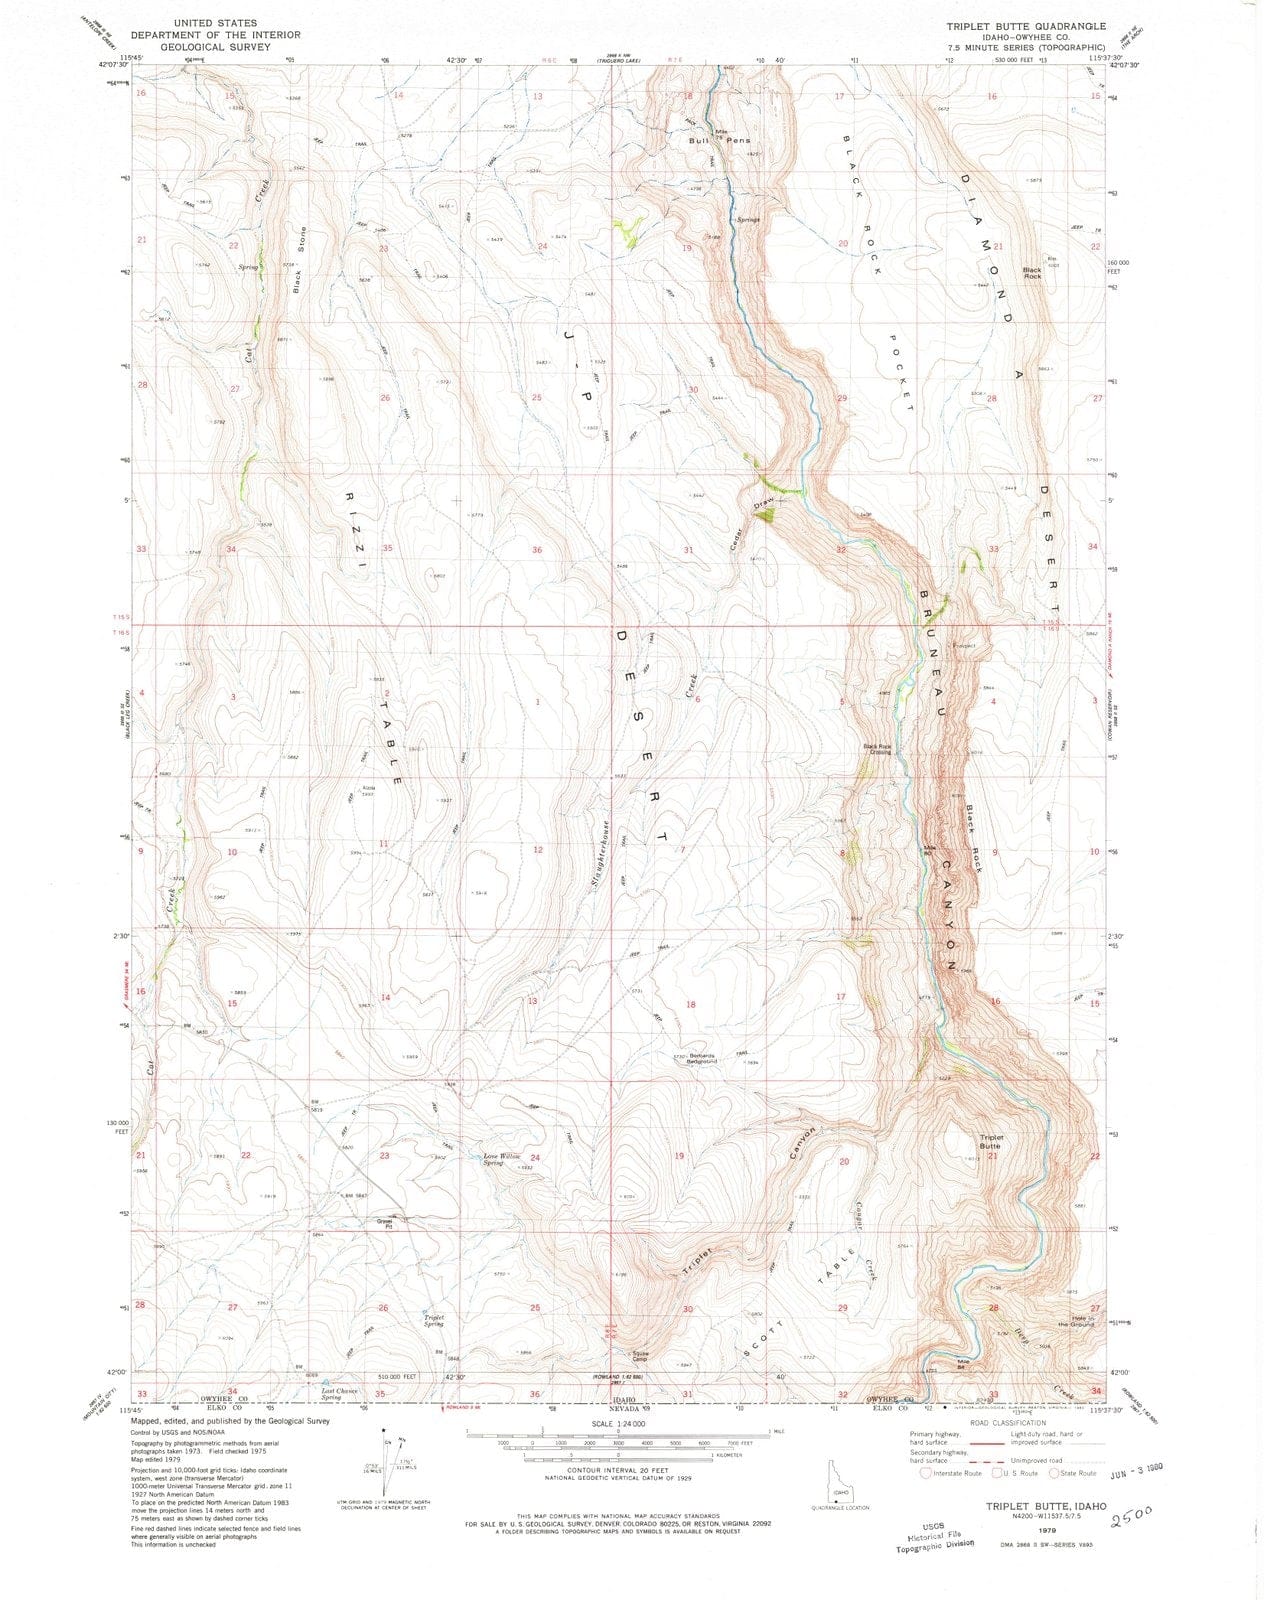 1979 Triplet Butte, ID - Idaho - USGS Topographic Map